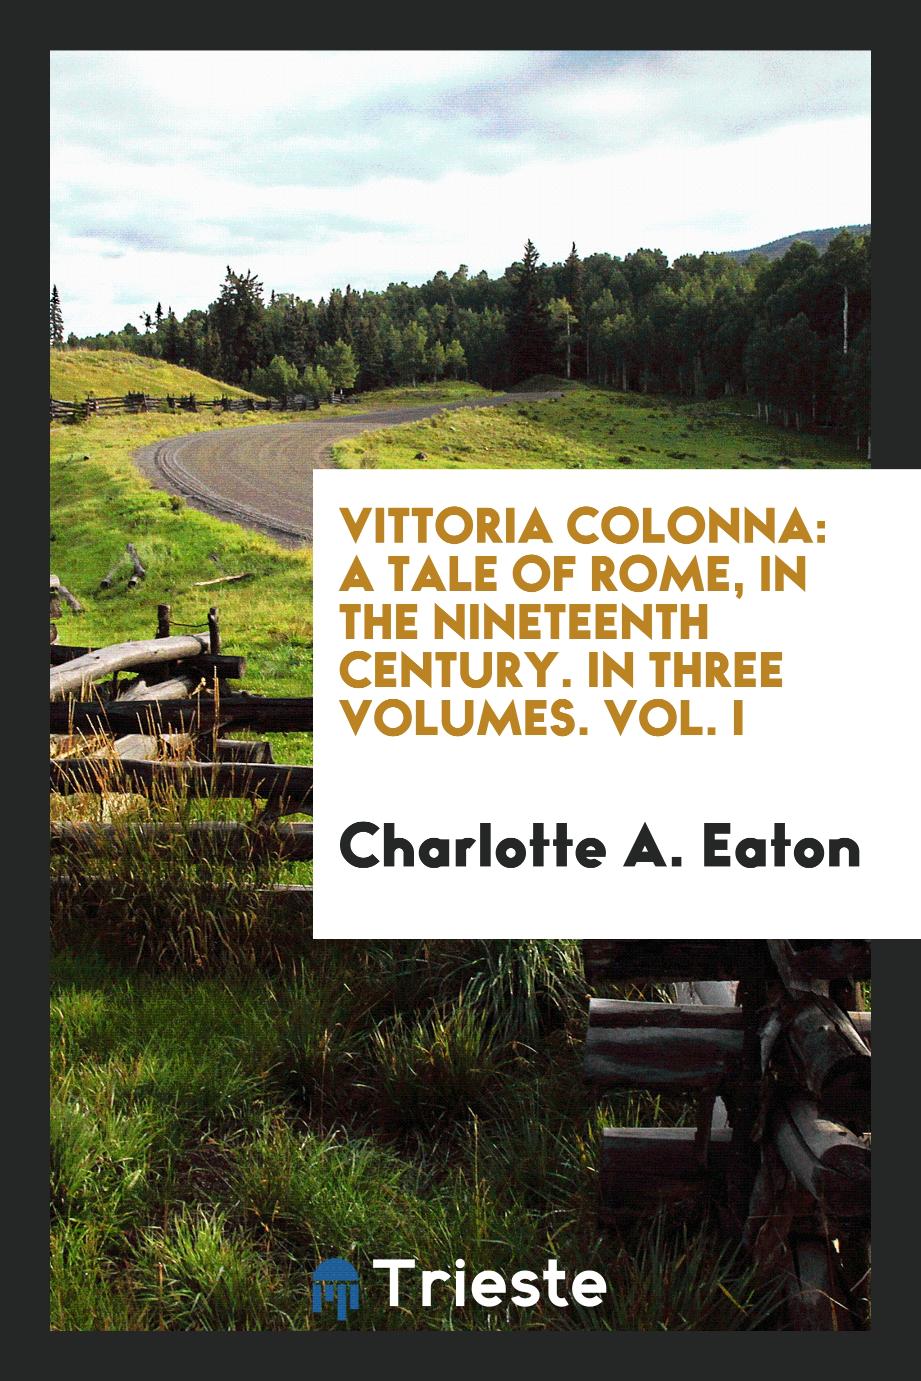 Charlotte A. Eaton - Vittoria Colonna: a tale of Rome, in the nineteenth century. In three volumes. Vol. I